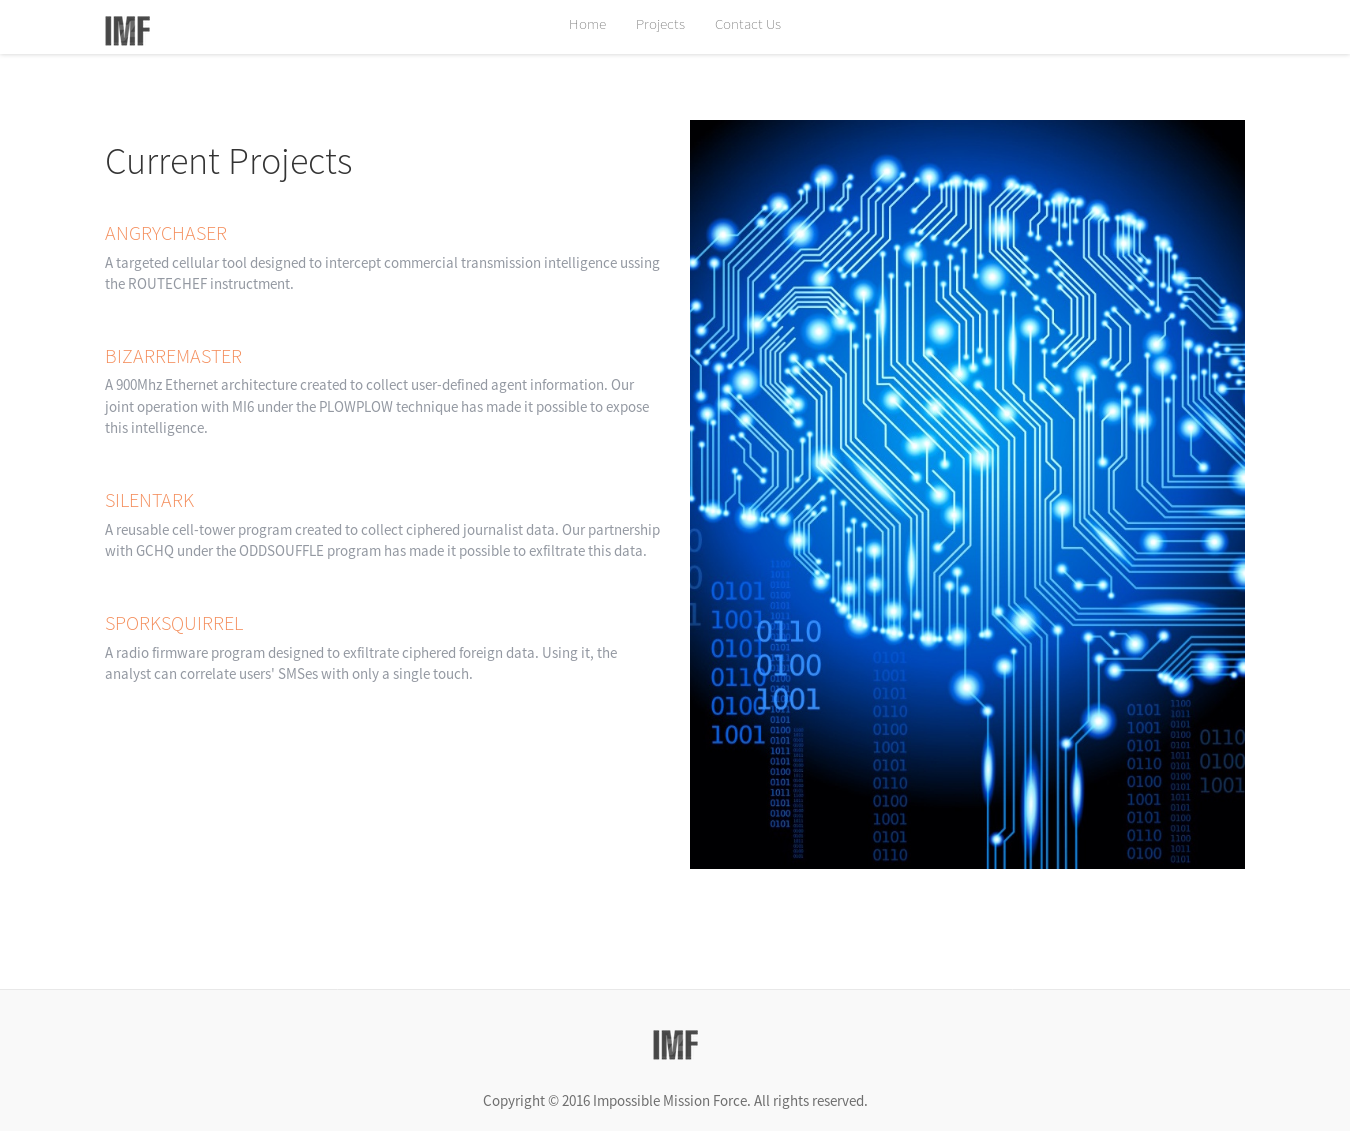 imf projects